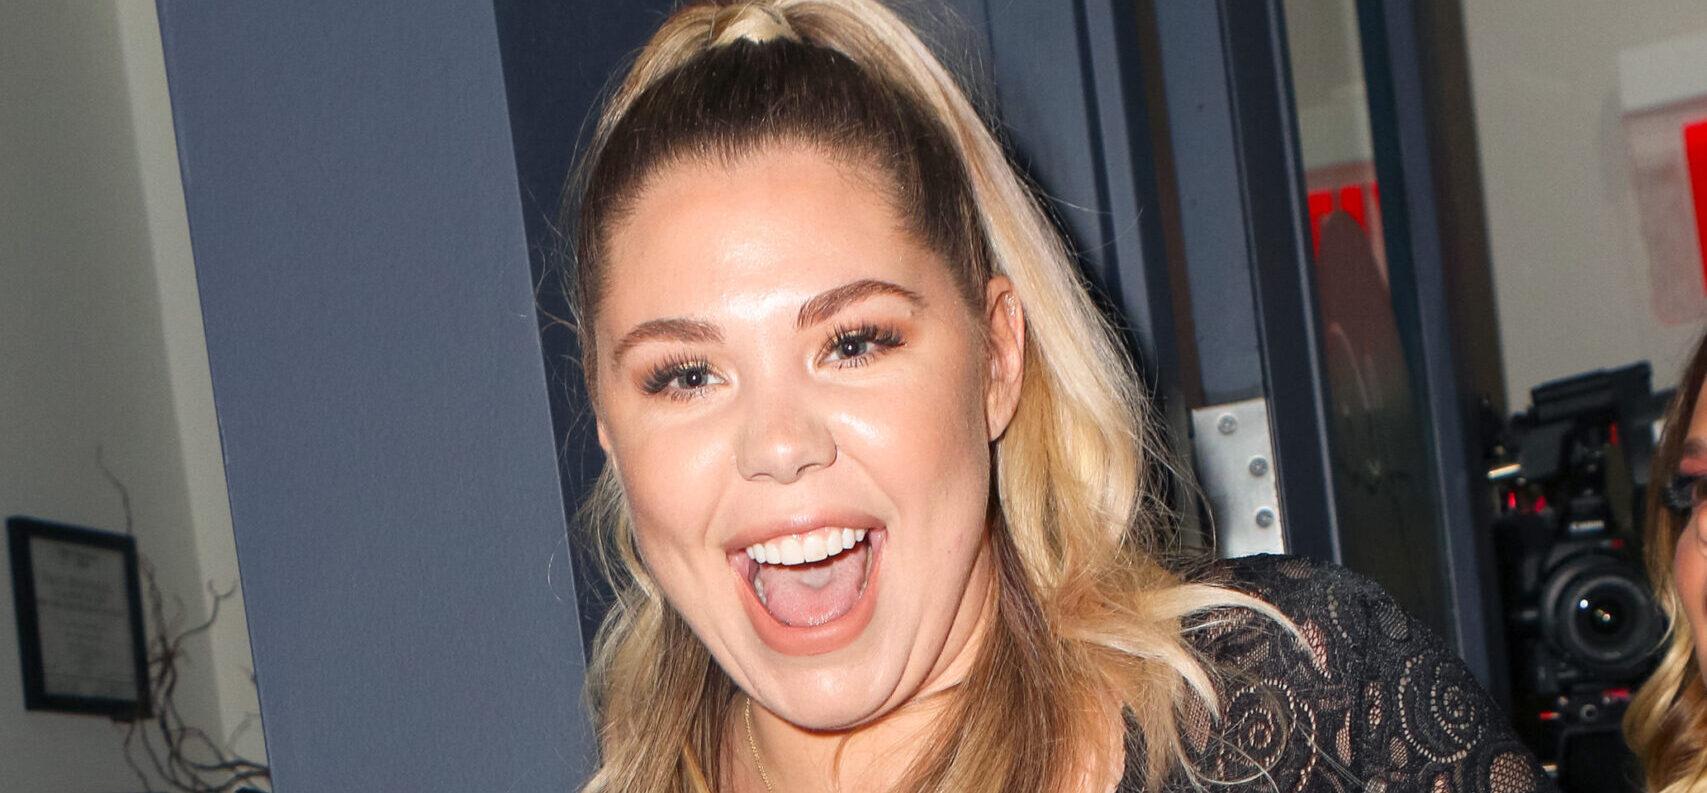 Kailyn Lowry Is Eating And Playing With Her Placenta Again!